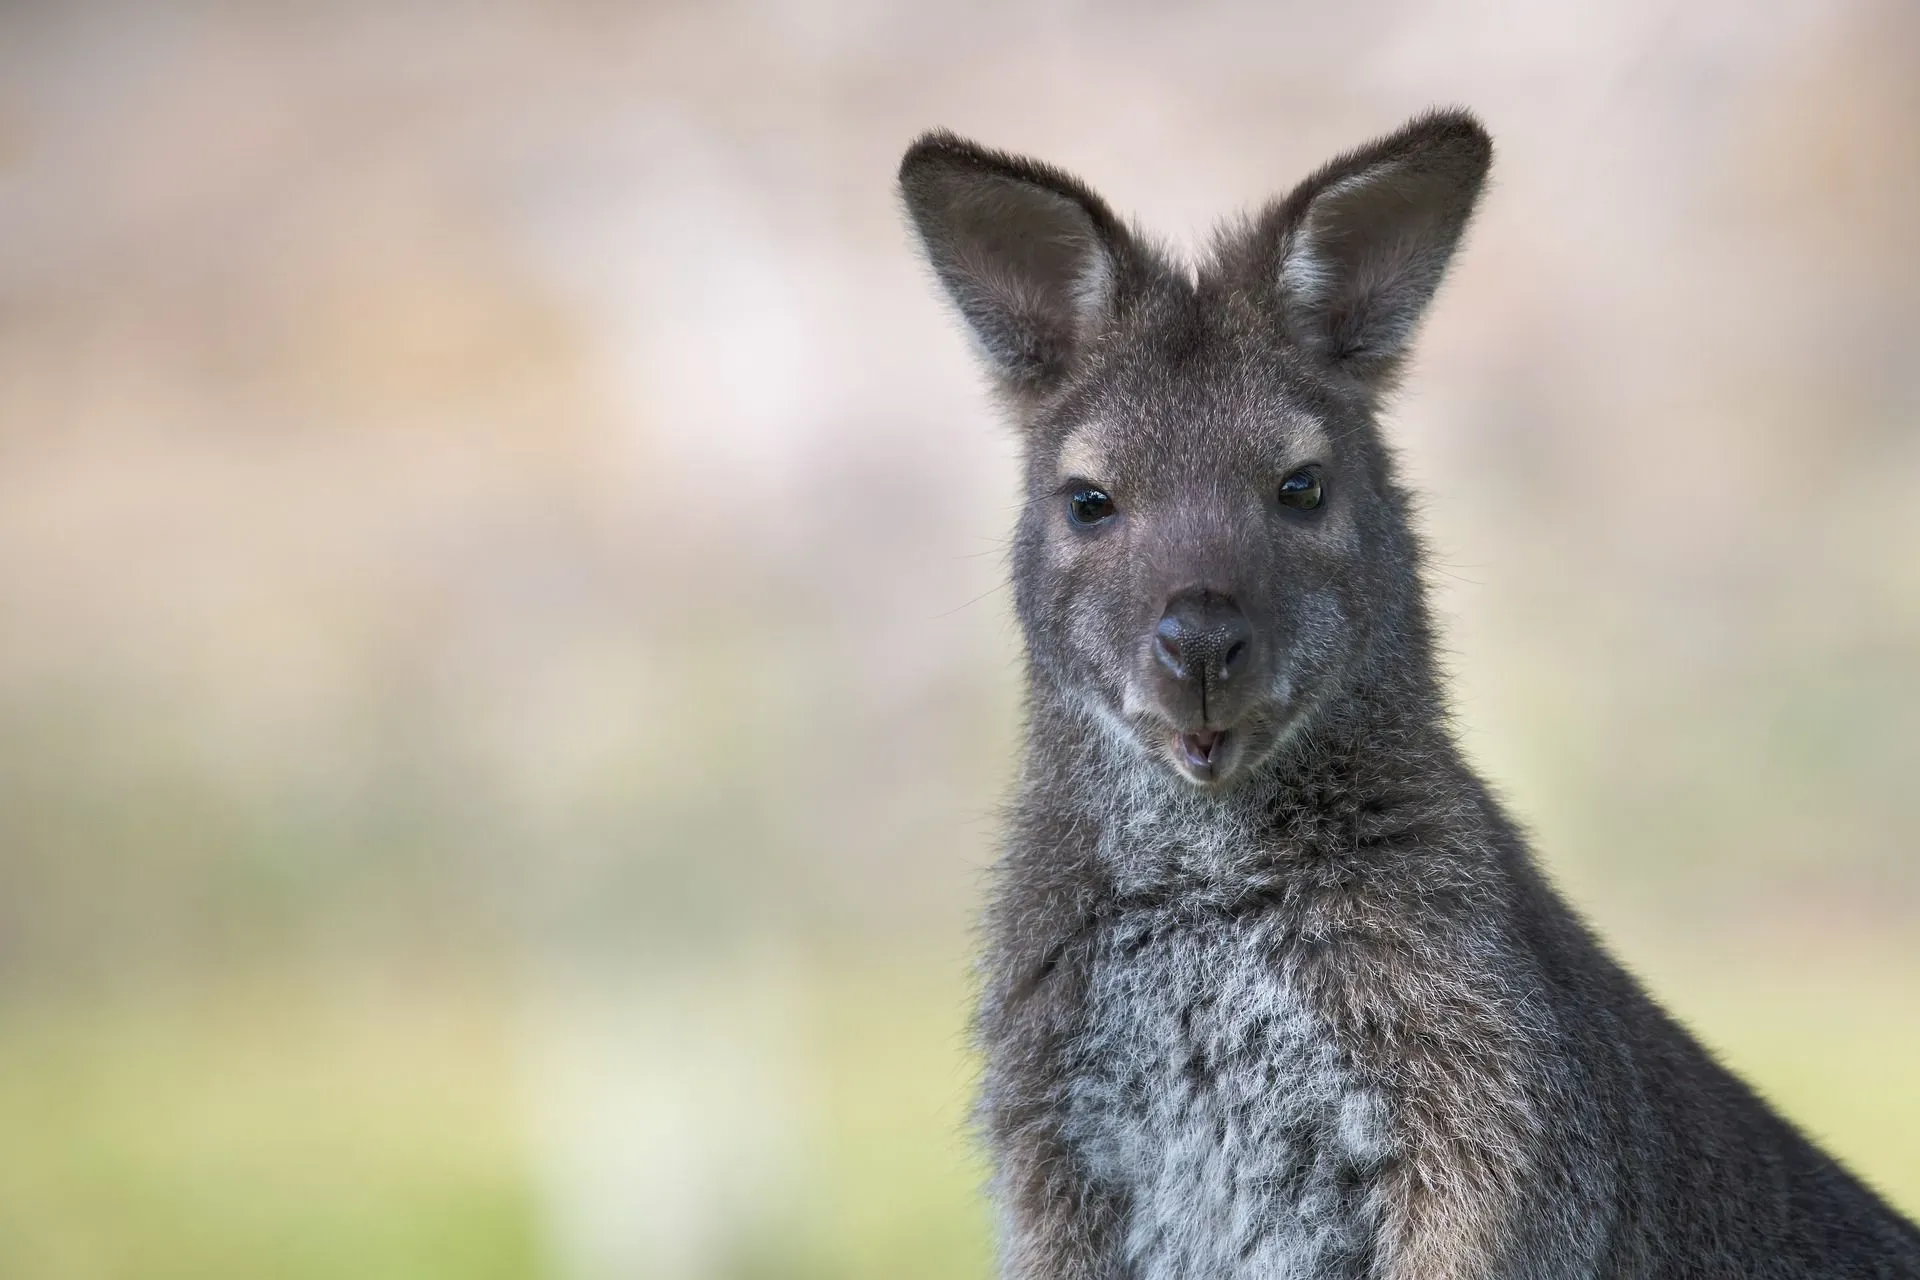 Bennett's wallaby is a close genus member of the toolache wallaby.